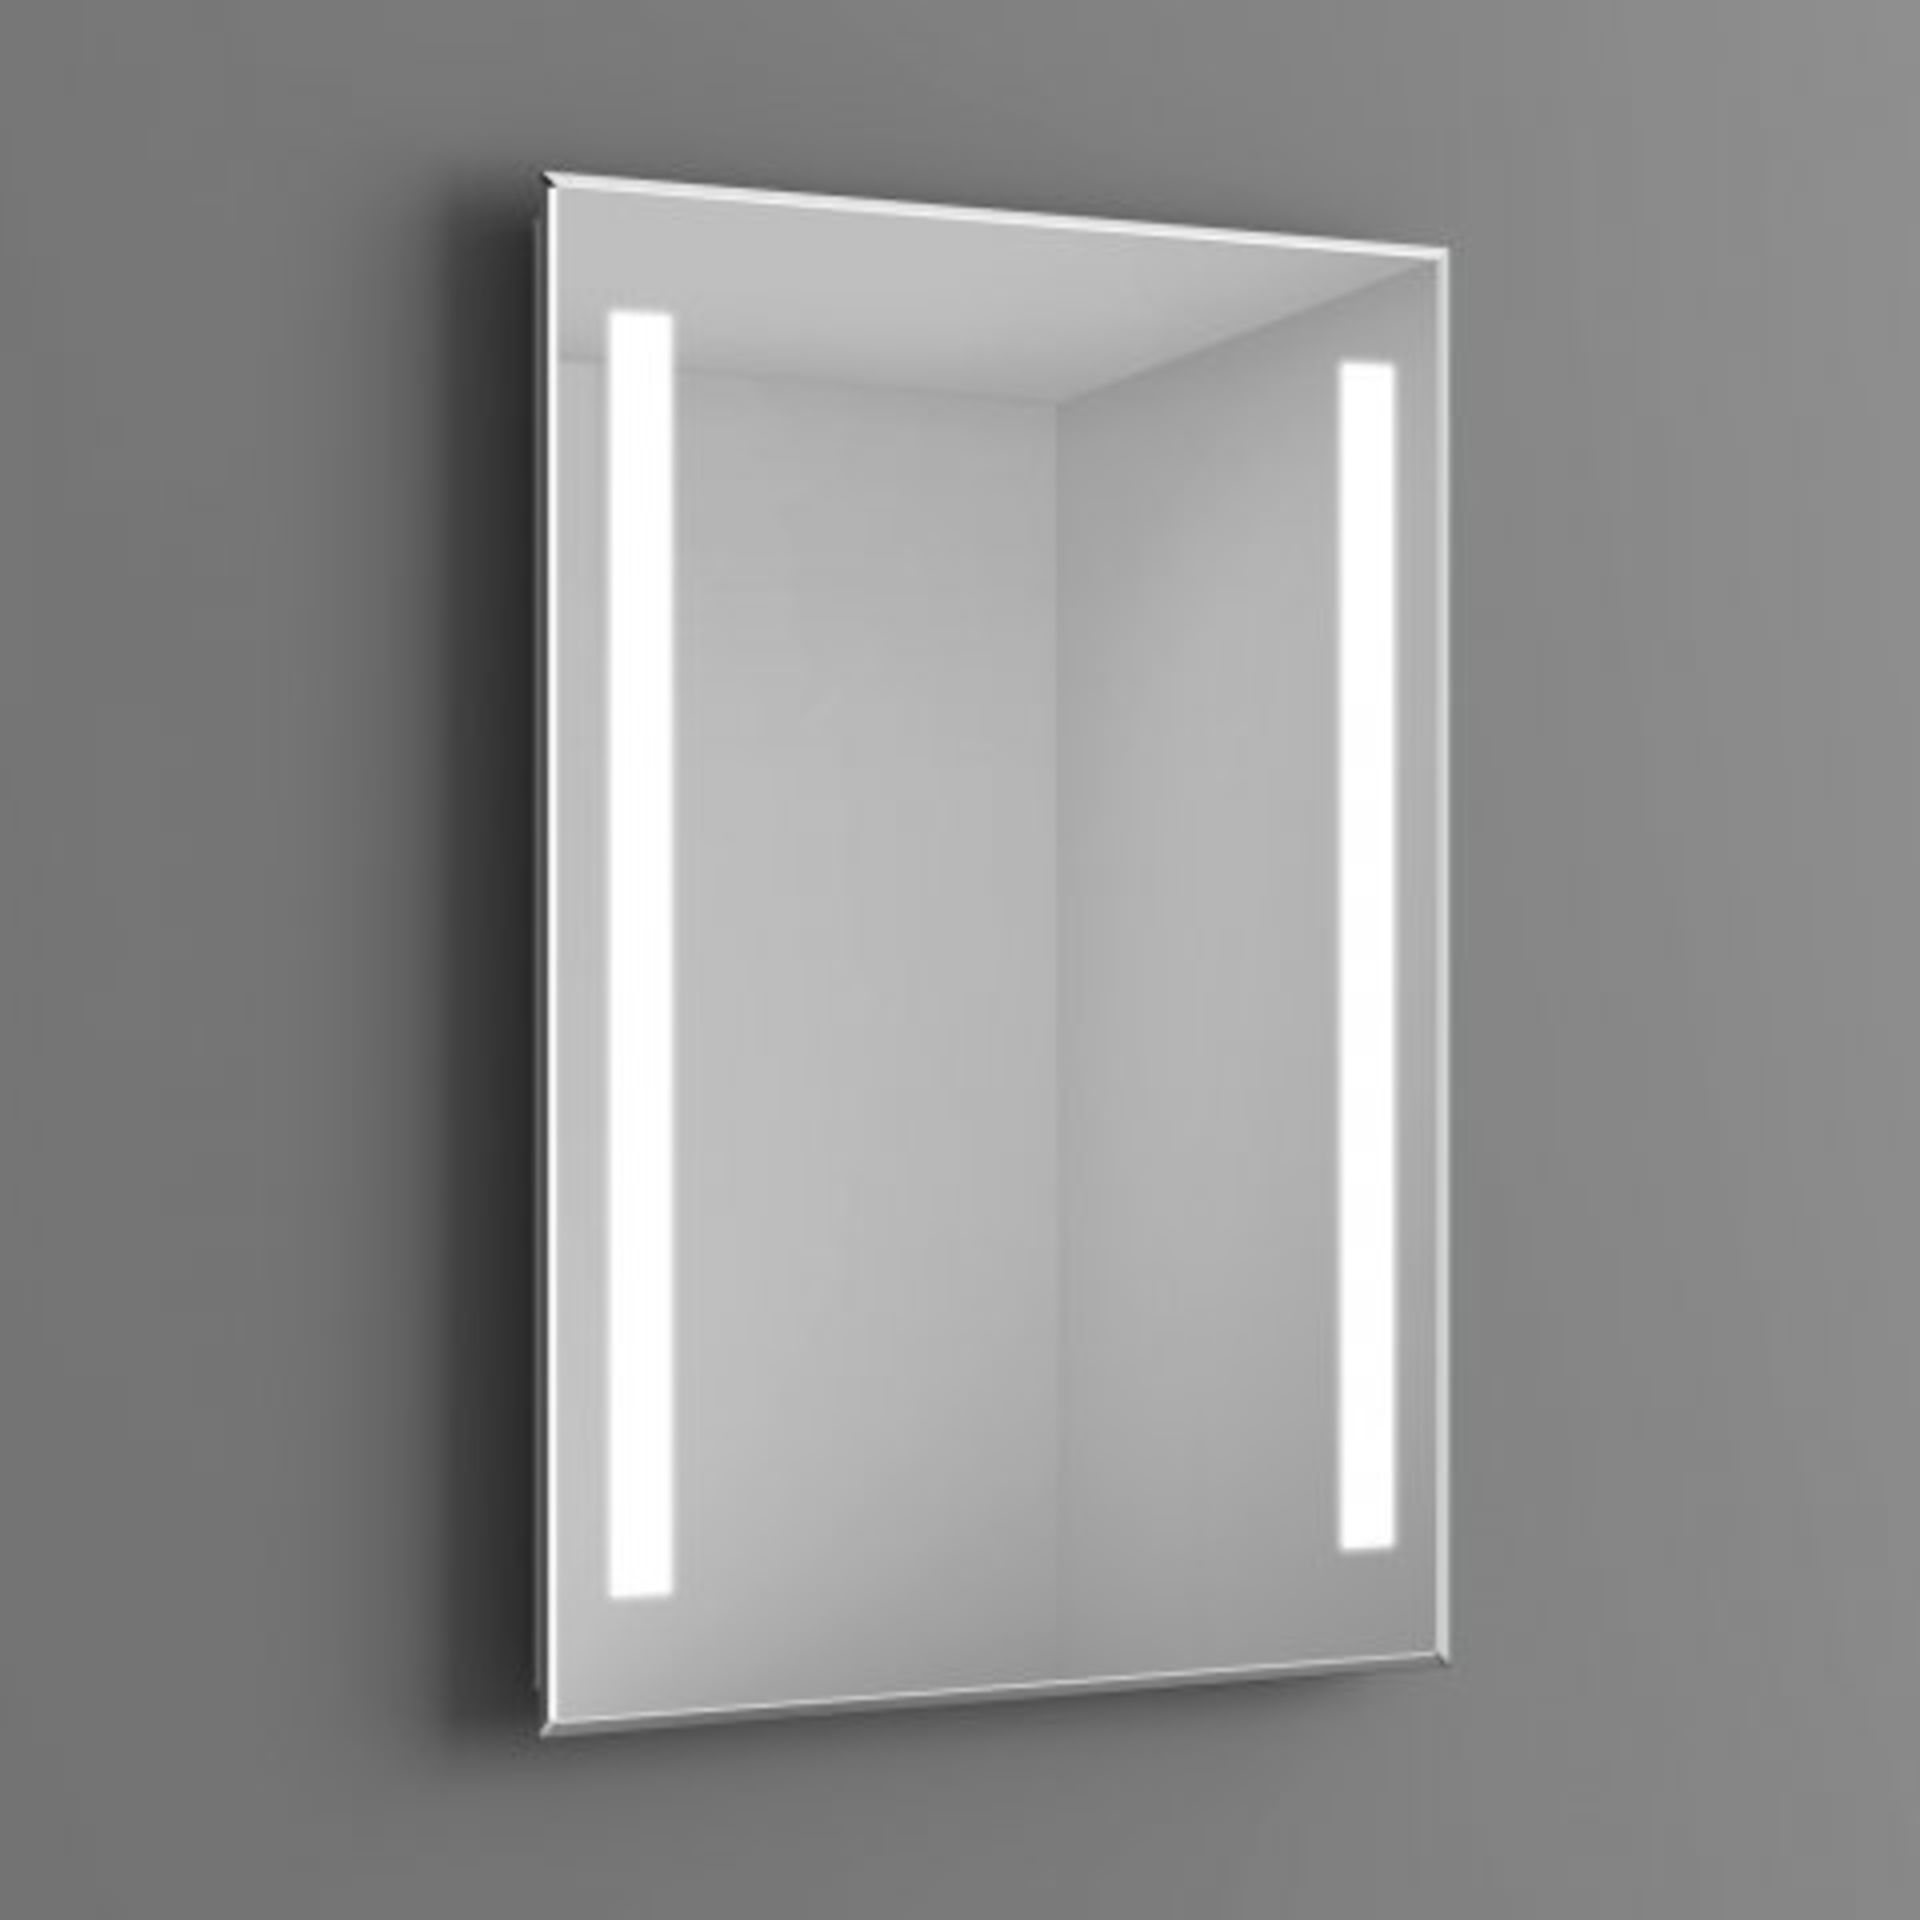 (M21) 600x800mm Omega Illuminated LED Mirror. RRP £349.99. Our ultra-flattering LED Mirror boats